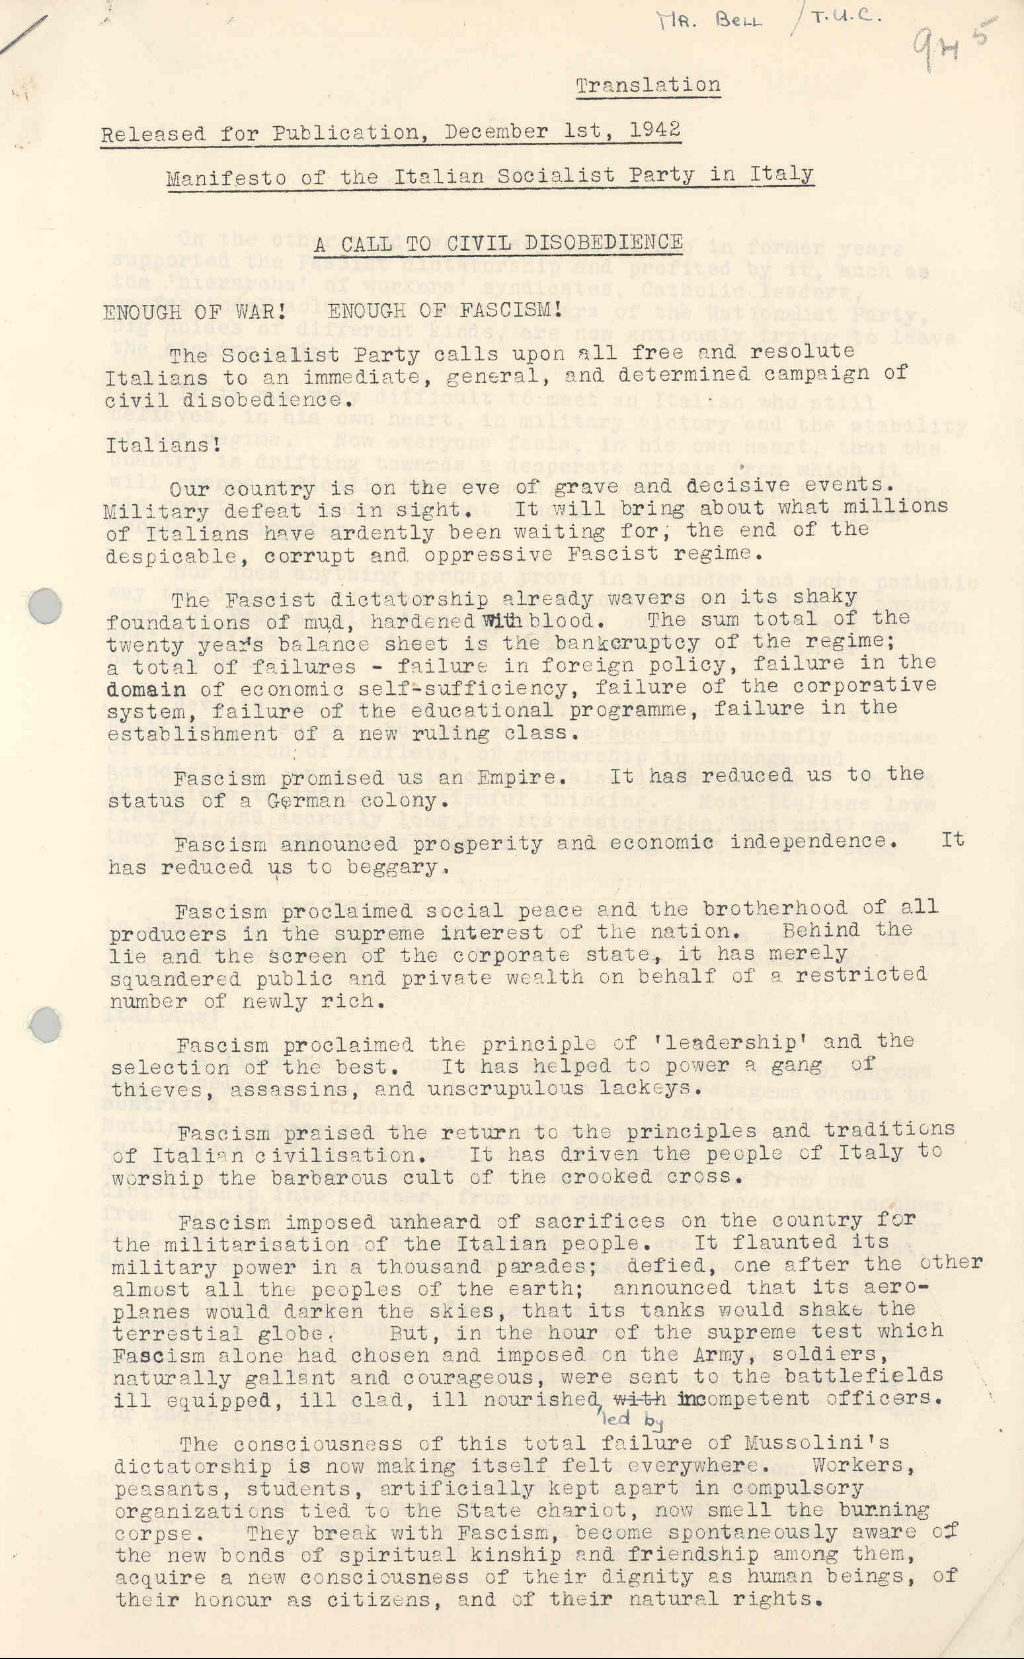 Manifesto of the Italian Socialist Party in Italy: 'A Call to Civil Disobedience', 1 December 1942